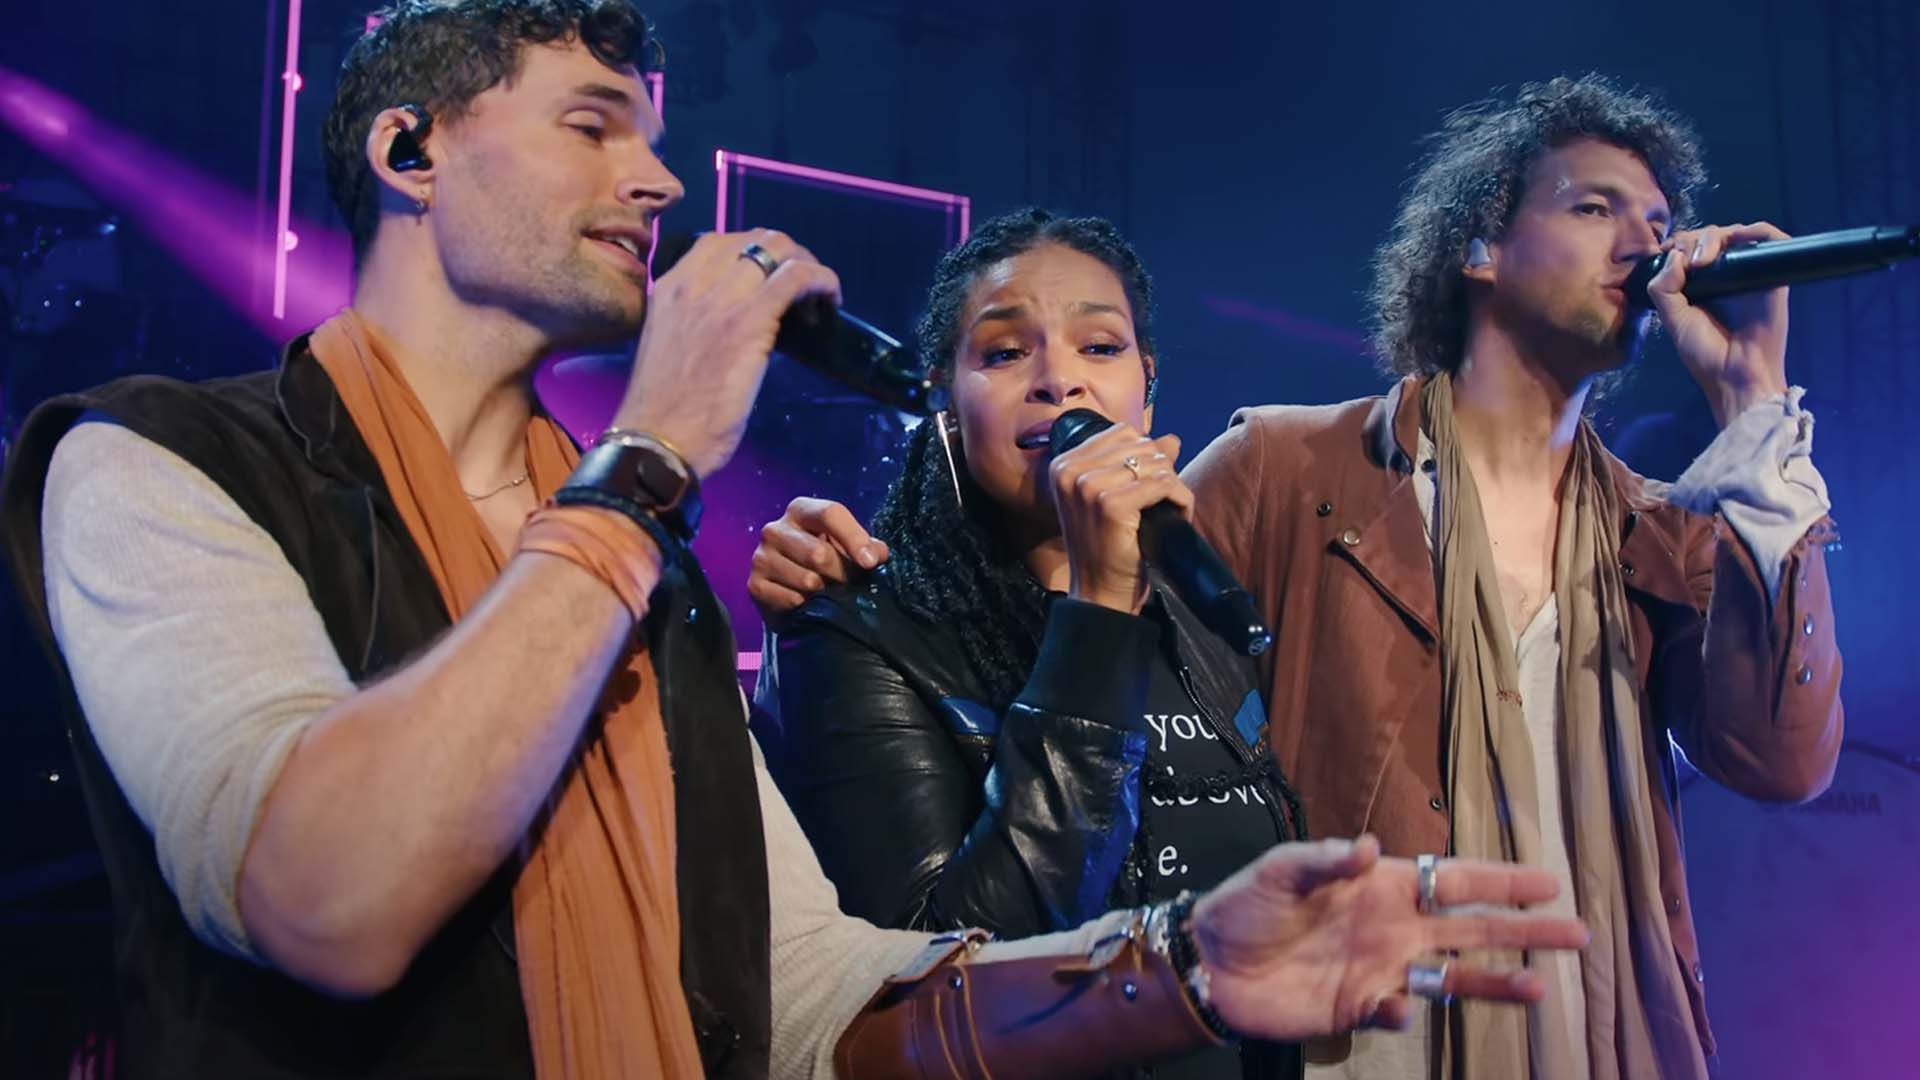 Jordin Sparks Performs "Love Me Like I Am" with FOR KING + COUNTRY